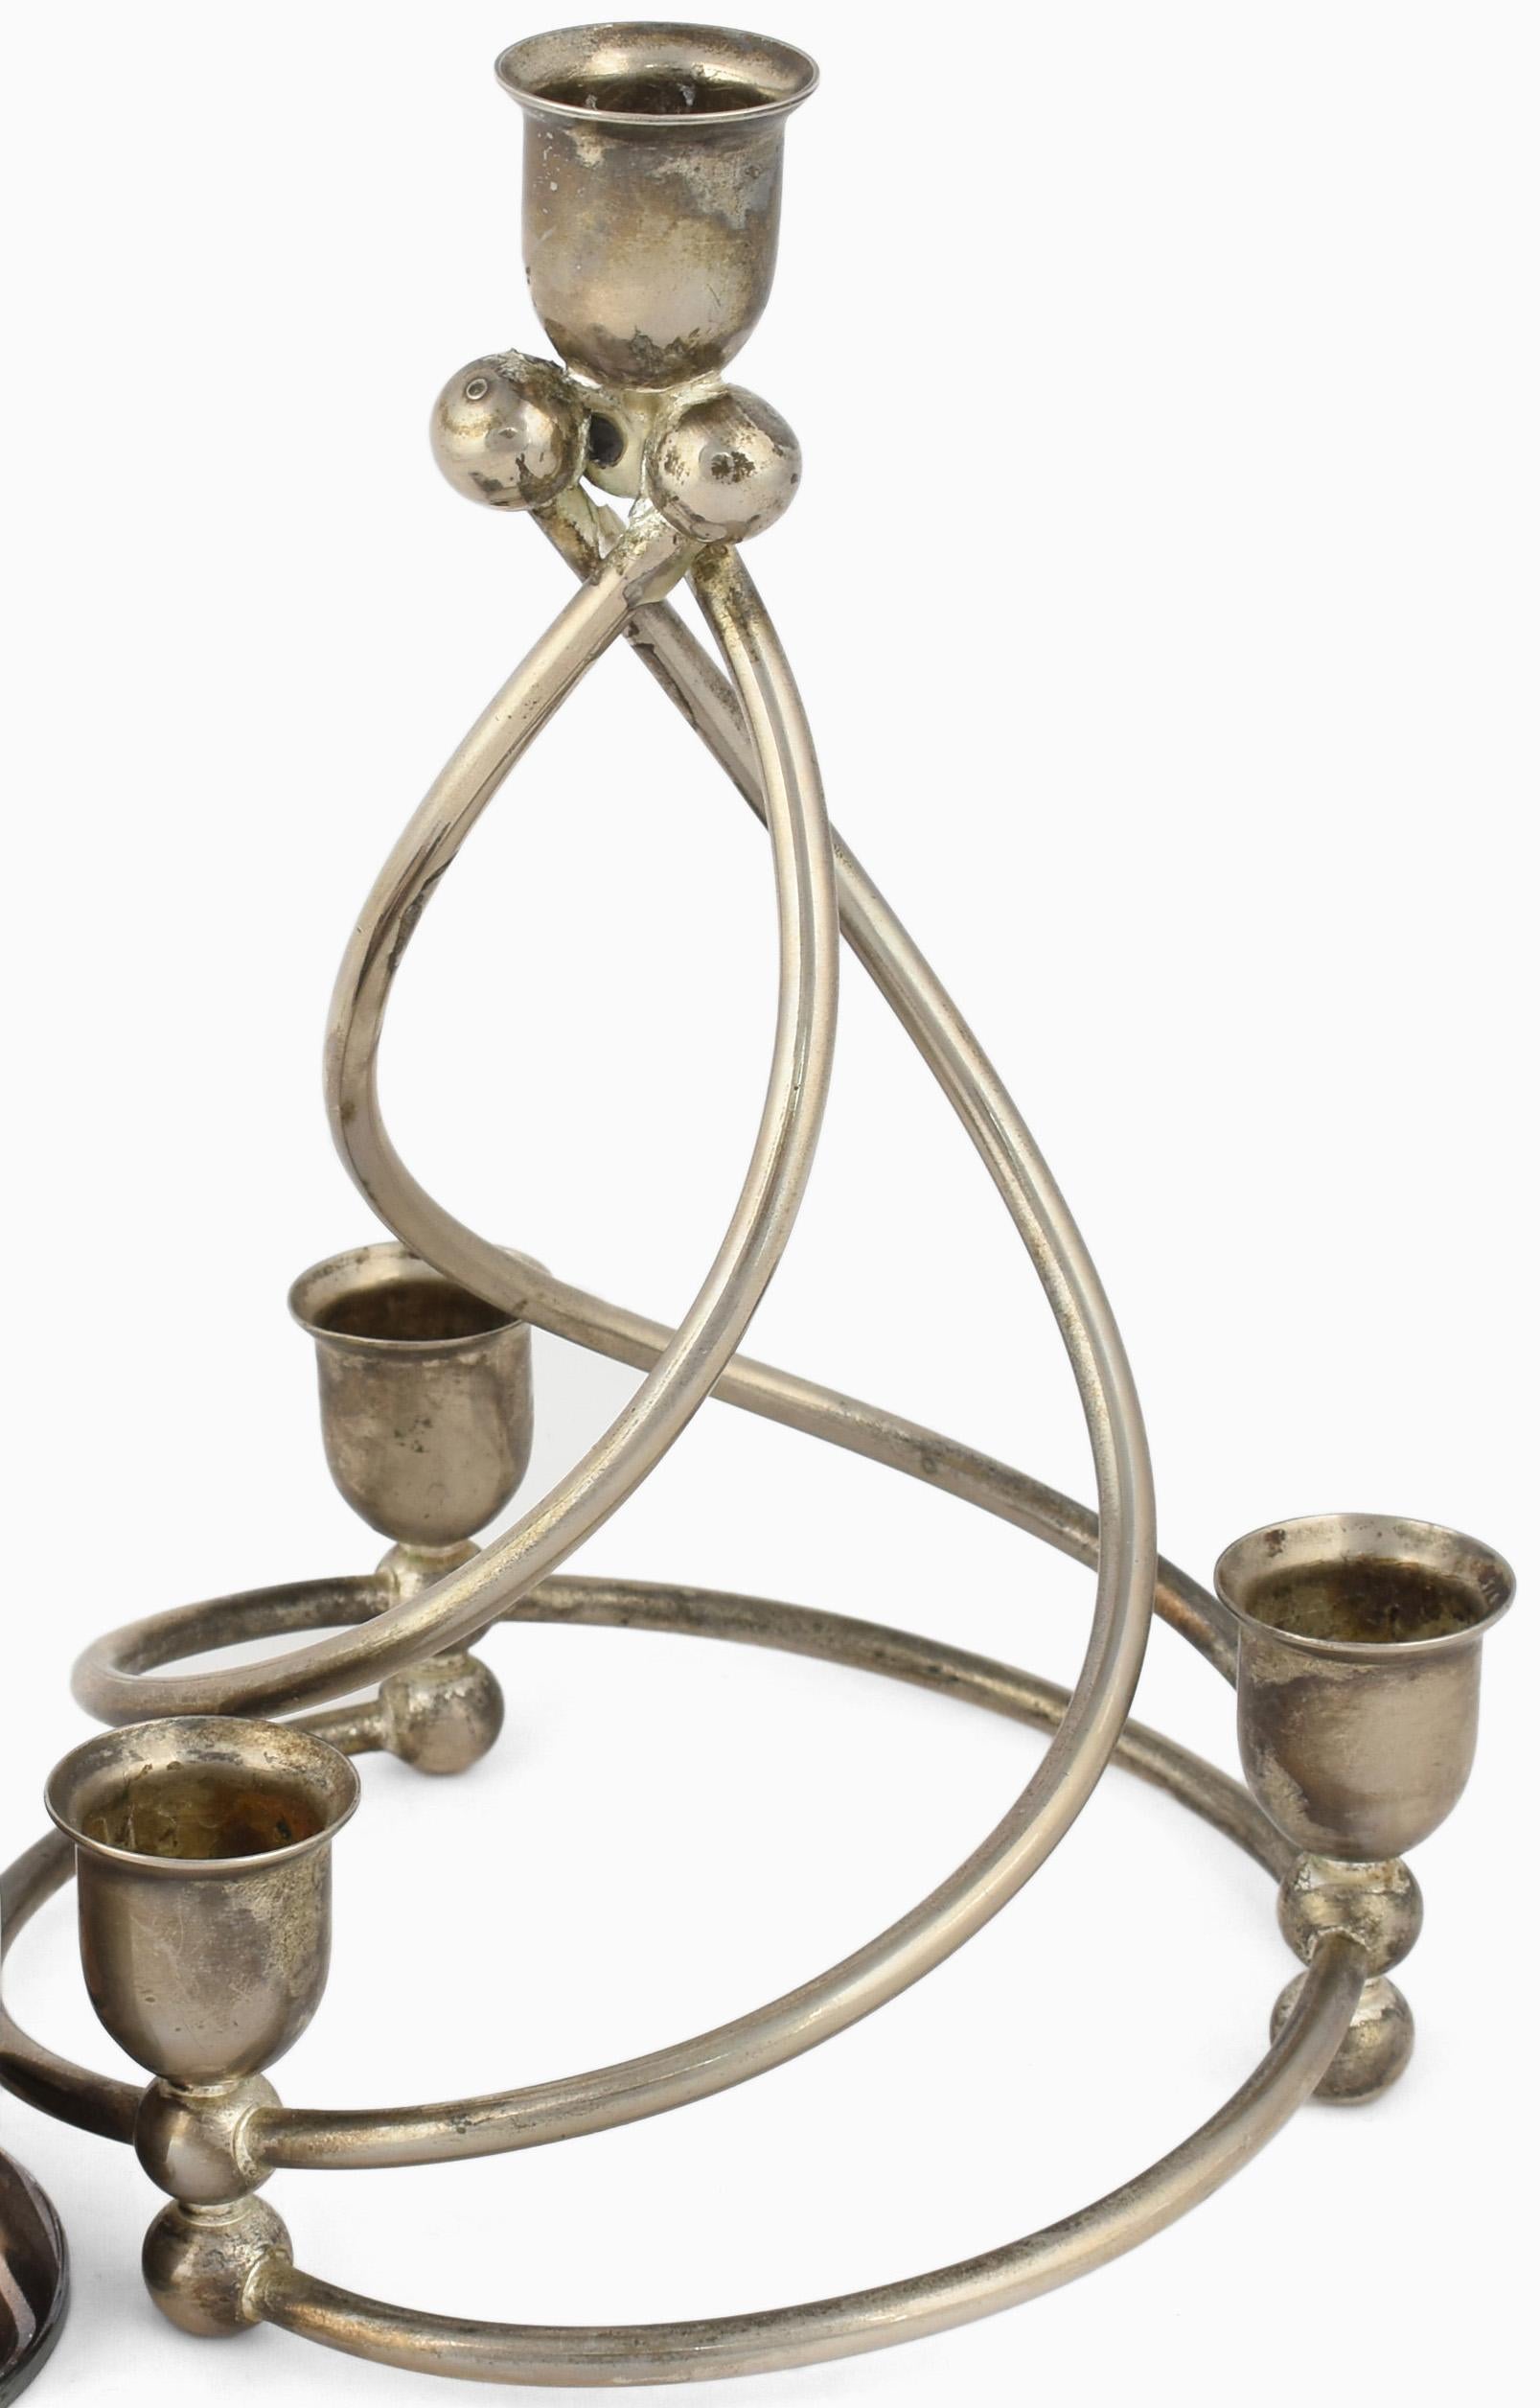 Two spiral candlesticks is an original decorative pair of objects realized in the 1920s. 

Original silver plated metal. The pair includes: one silver plated candlestick (H. 8 cm) and one metal silver-colored candlestick (H. 22.5 cm). 

Made in